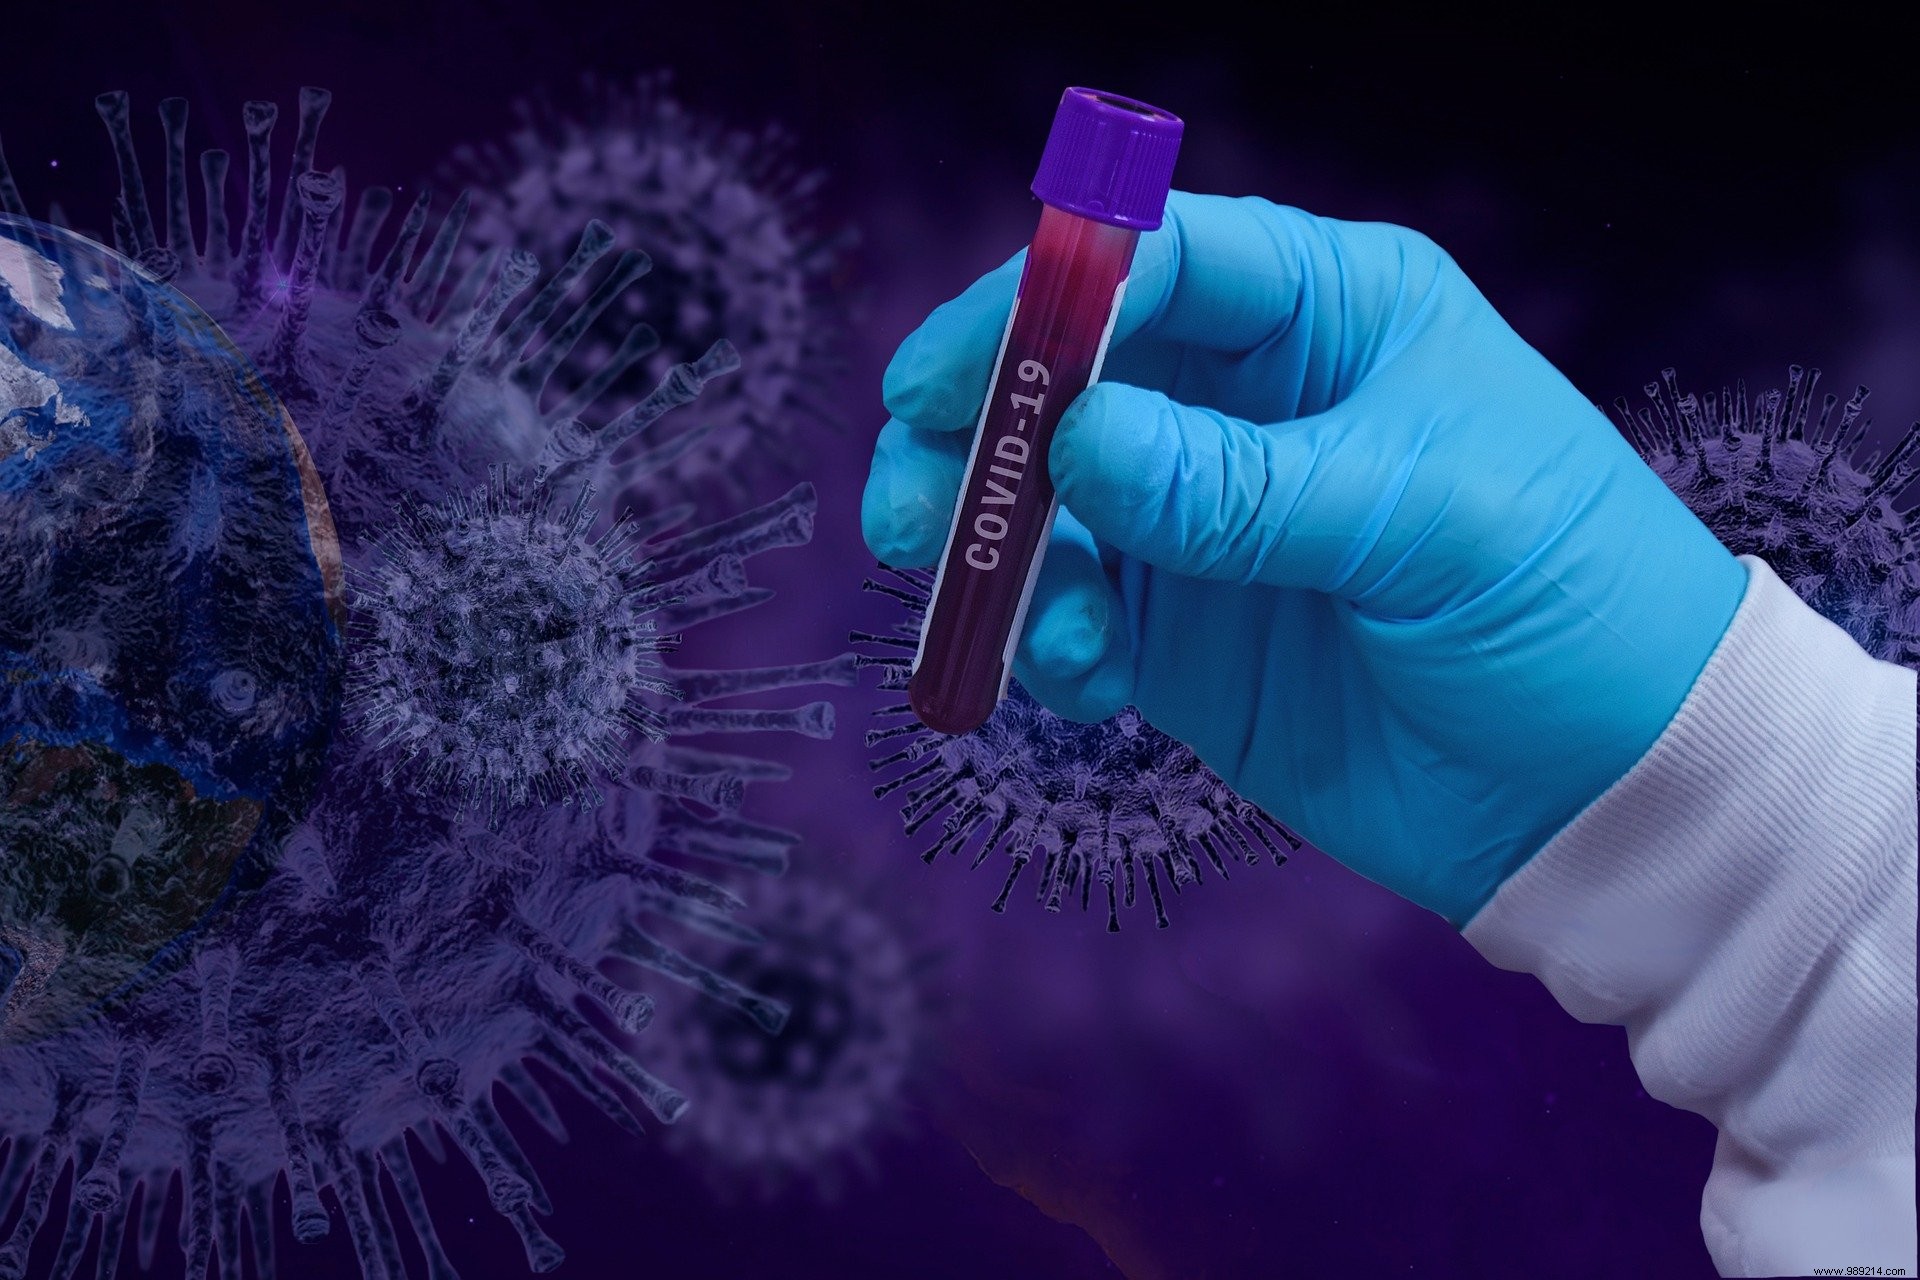 This hacker is releasing more than 5,000 documents related to coronavirus research 